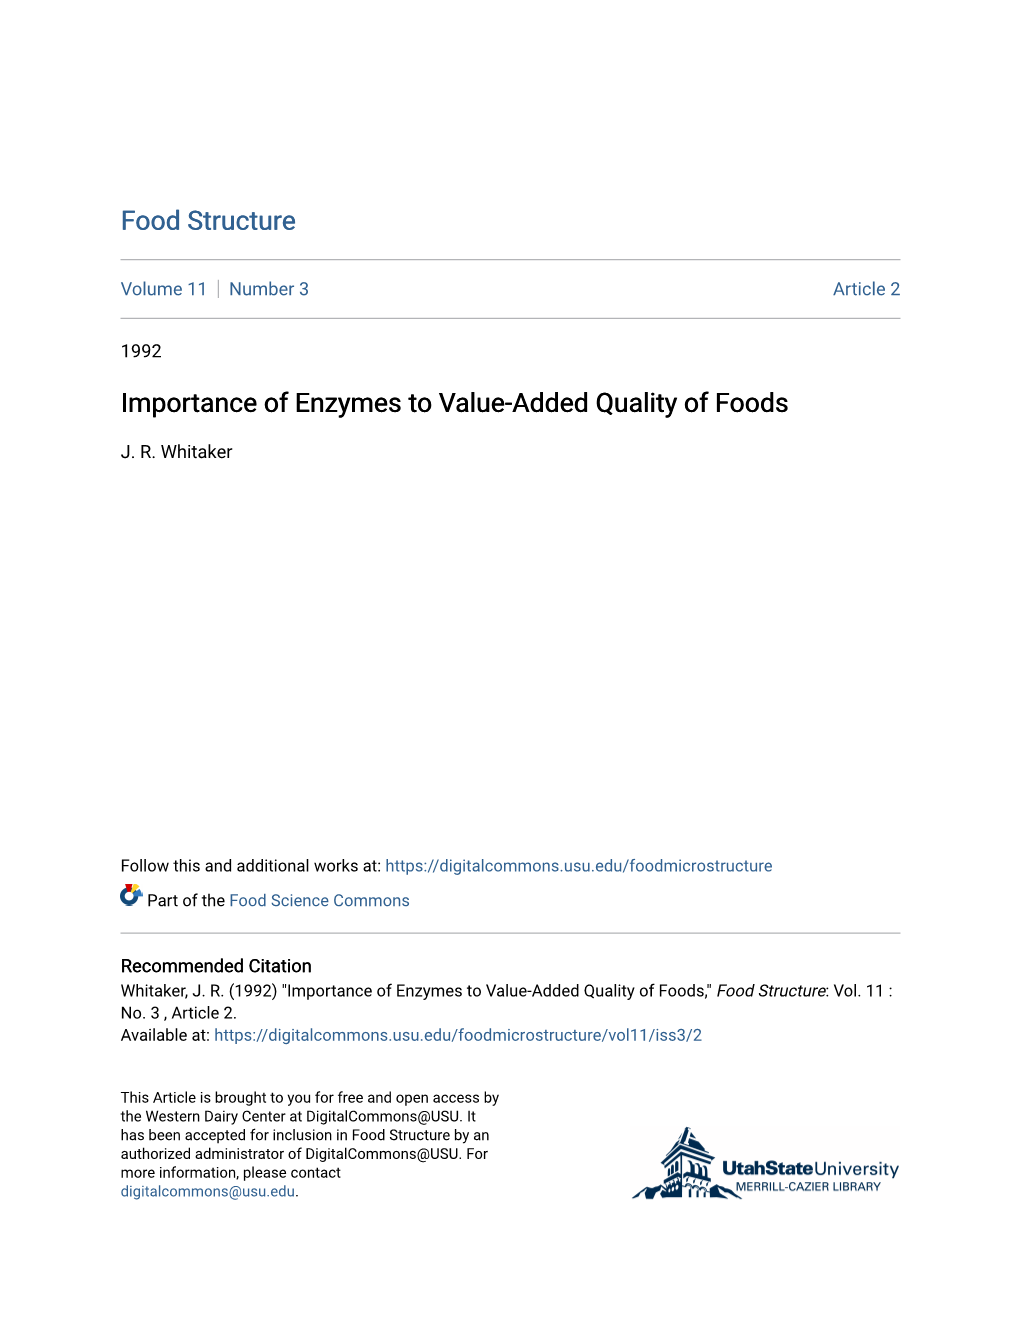 Importance of Enzymes to Value-Added Quality of Foods